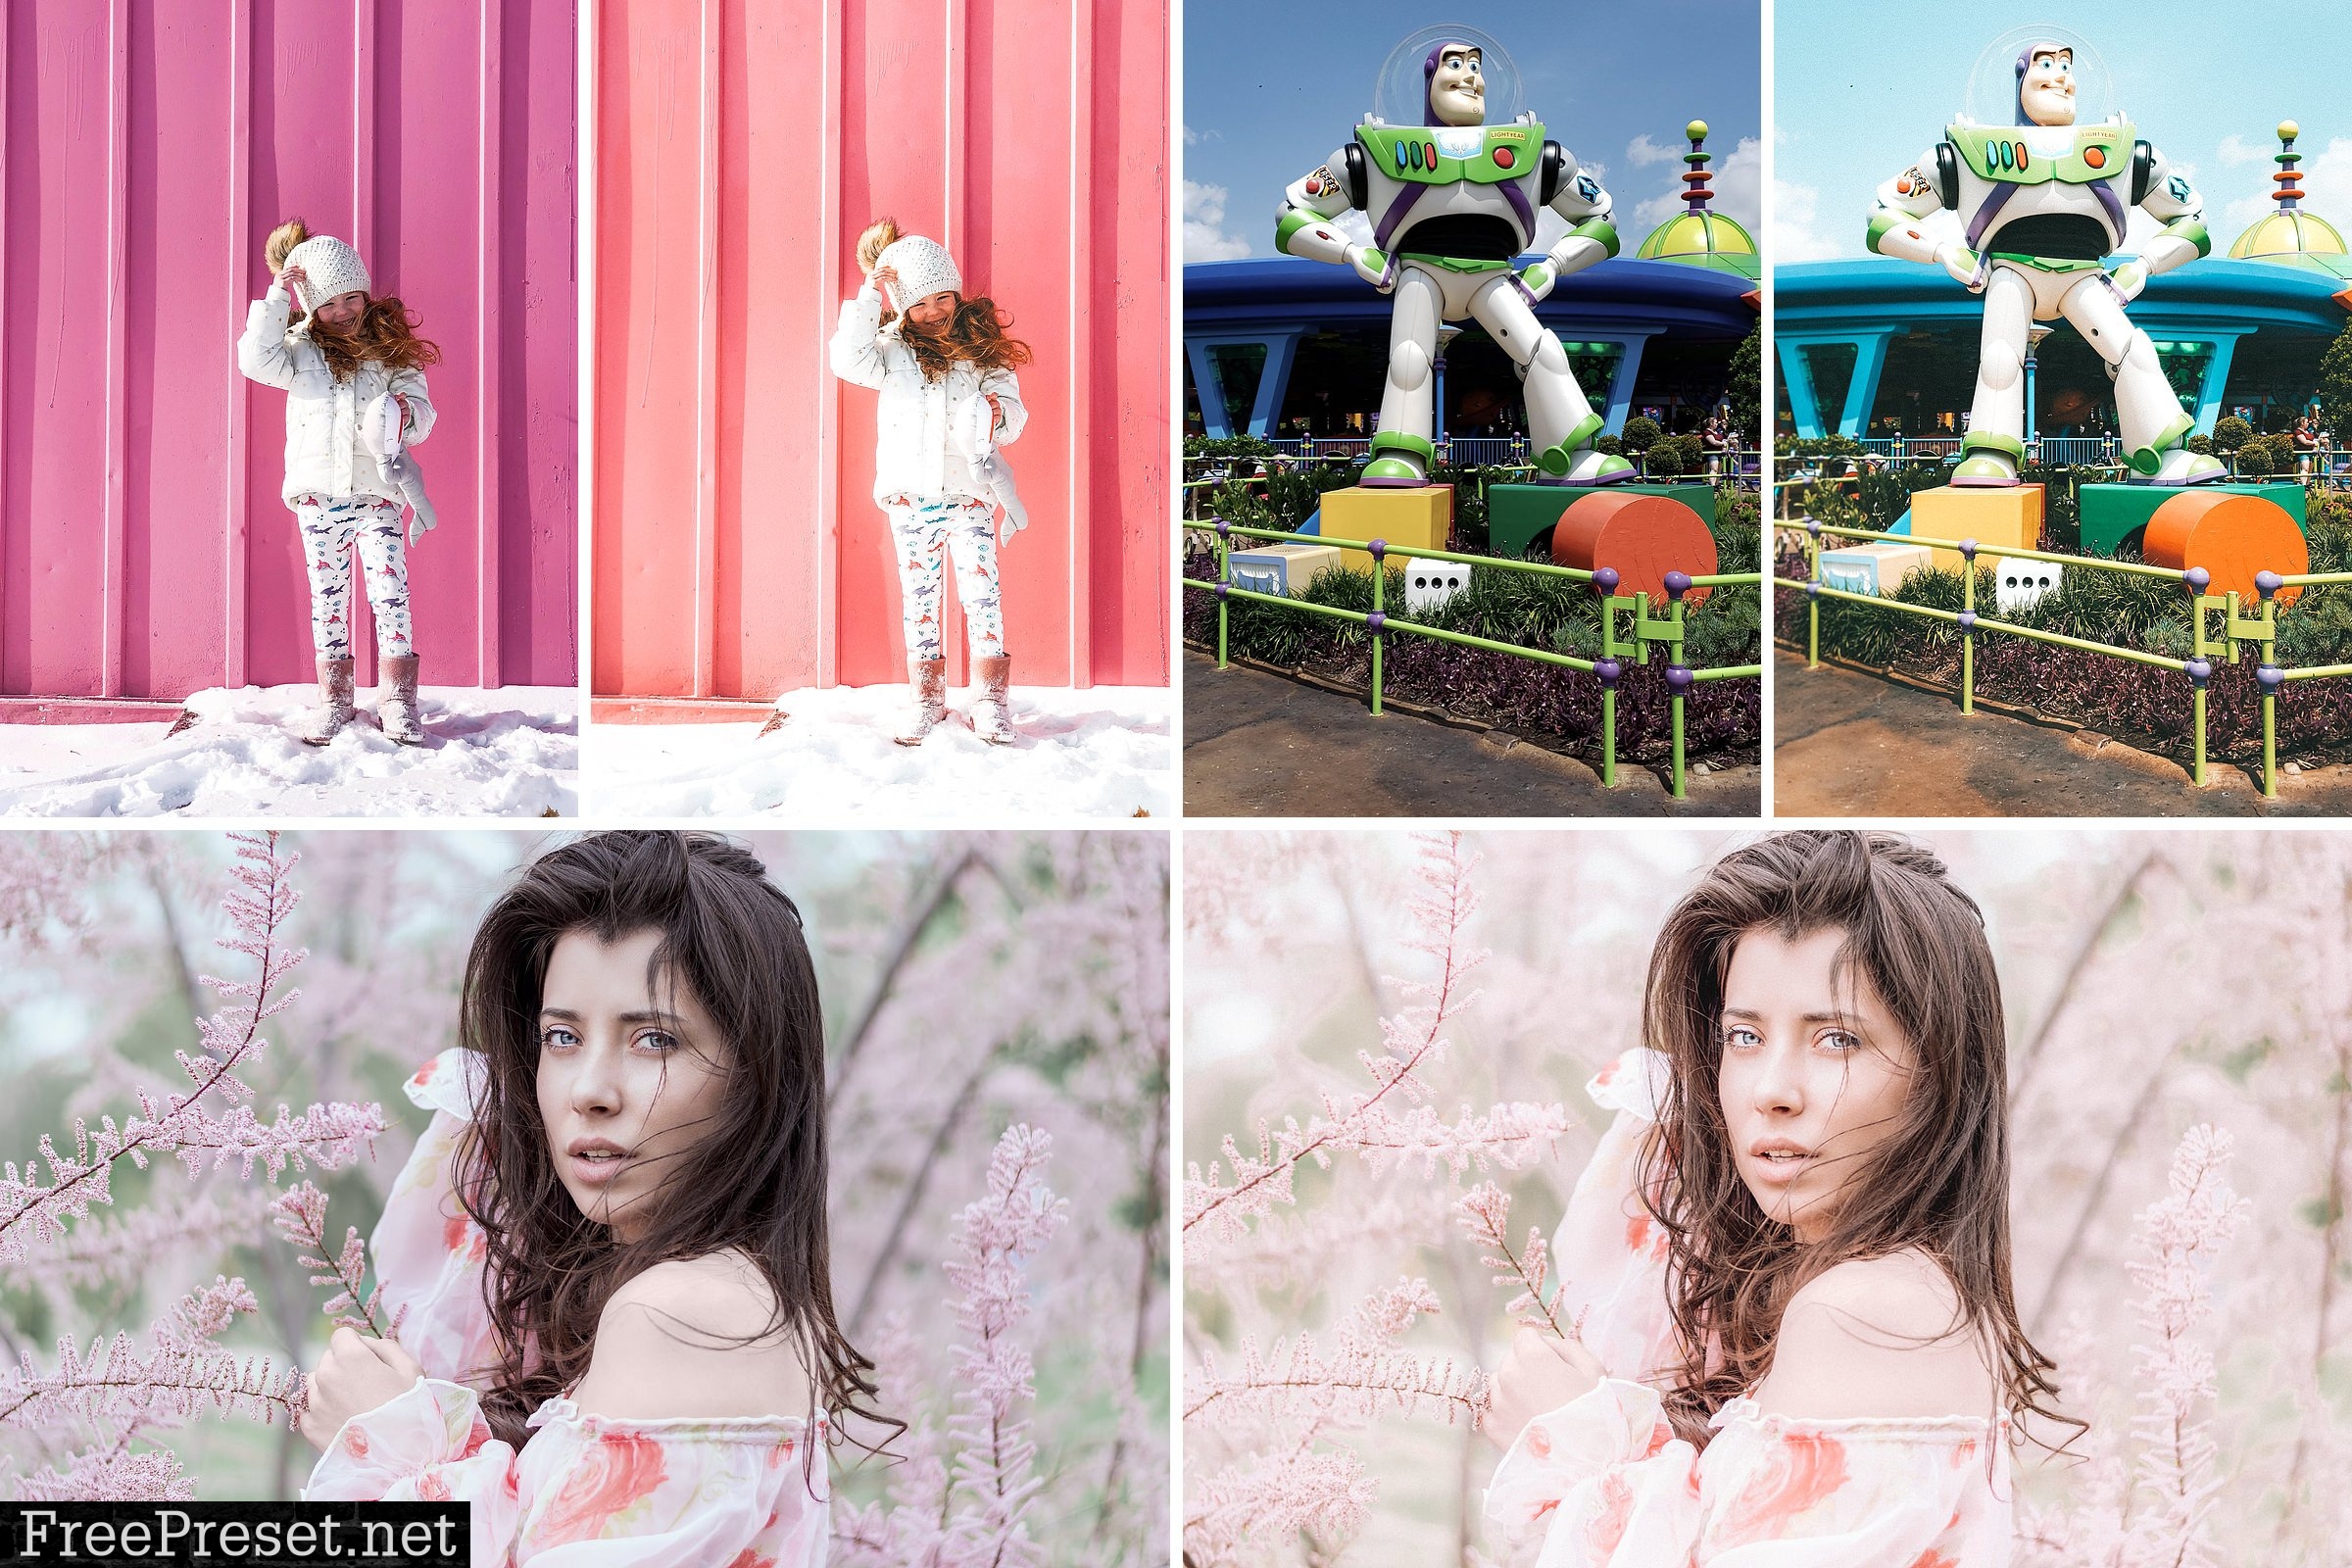 24. Candy Colors Presets